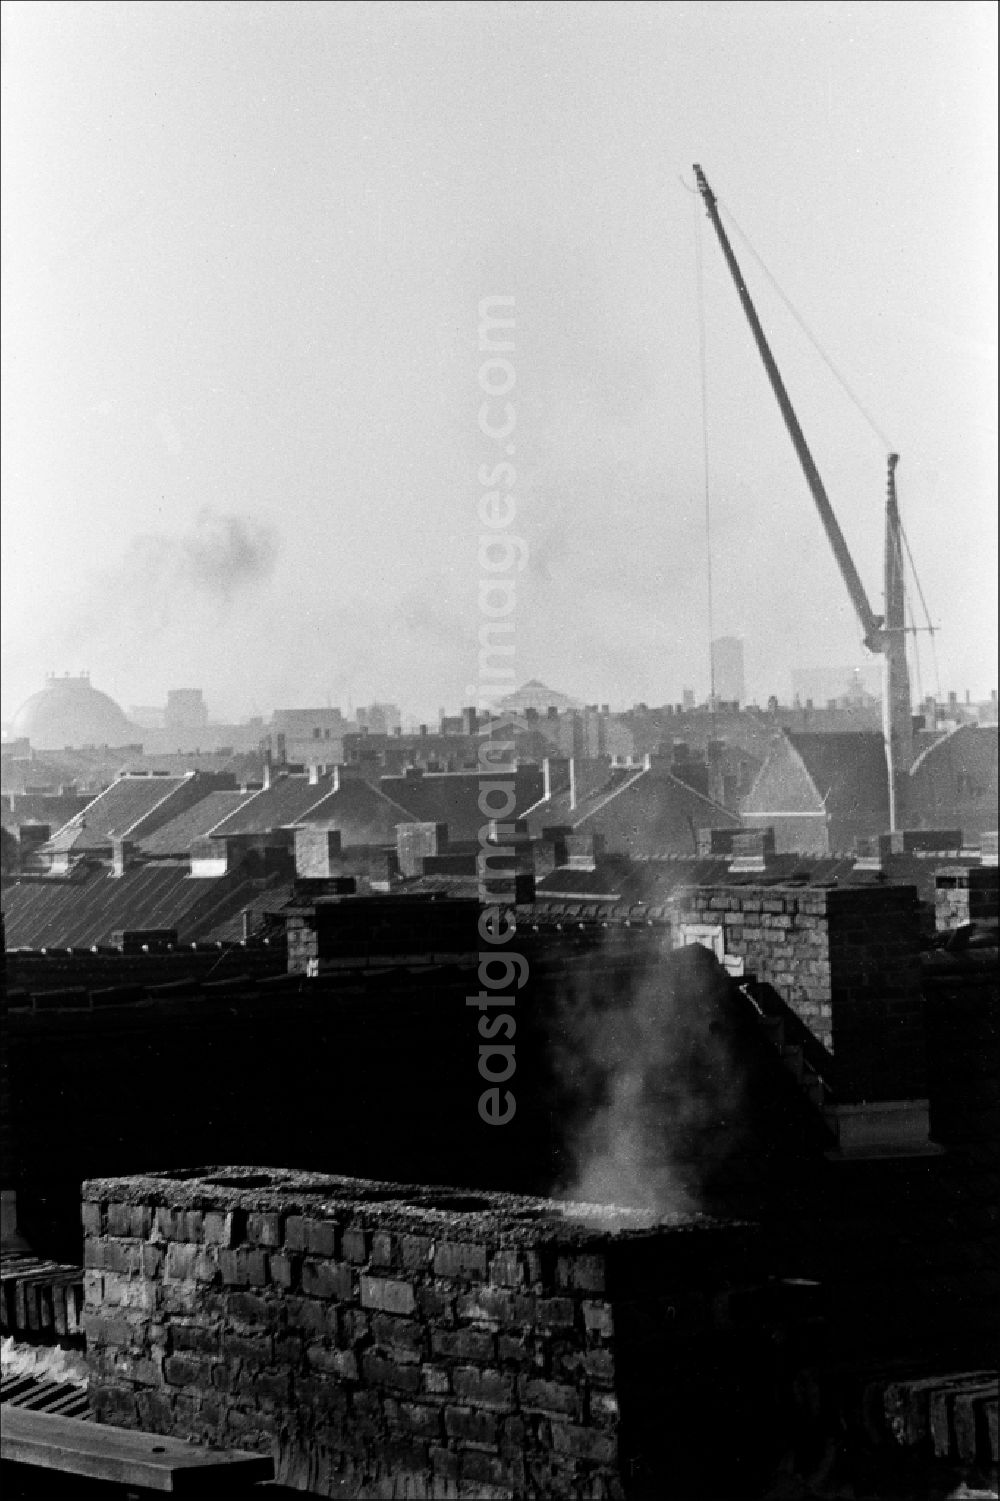 GDR photo archive: Berlin - View over the roofs in winter during the heating season in East Berlin on the territory of the former GDR, German Democratic Republic